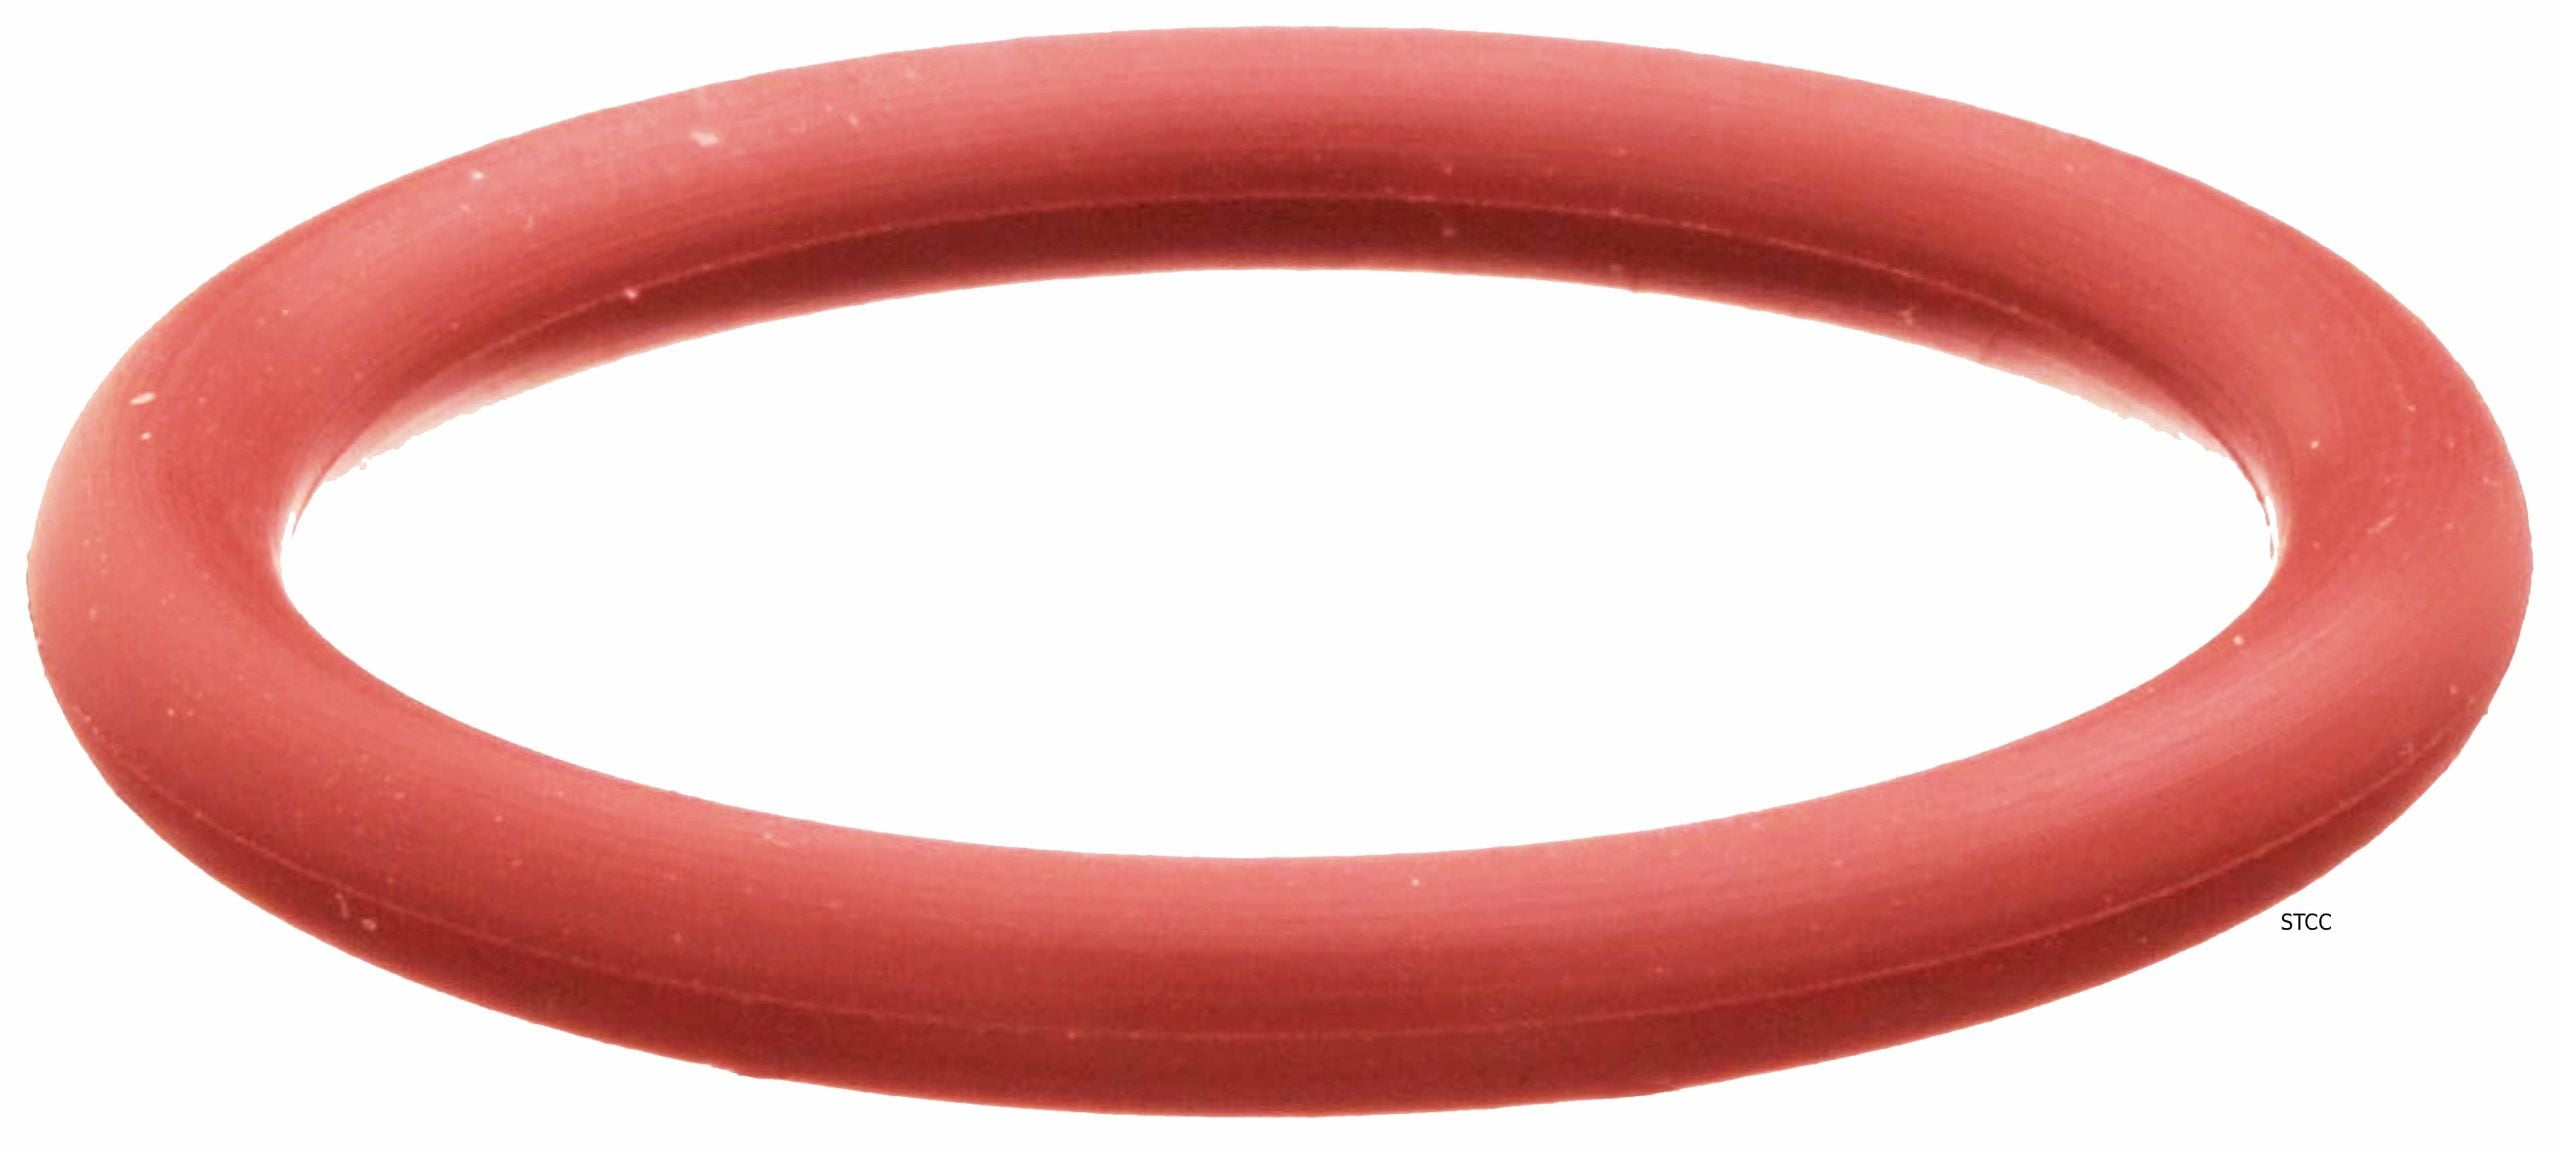 Small Parts 3-1/8 ID 3-3/8 OD 1/8 Width 3-3/8 OD 70A Durometer 1/8 Width Pack of 10 Pack of 10 3-1/8 ID 235 Silicone O-Ring Red